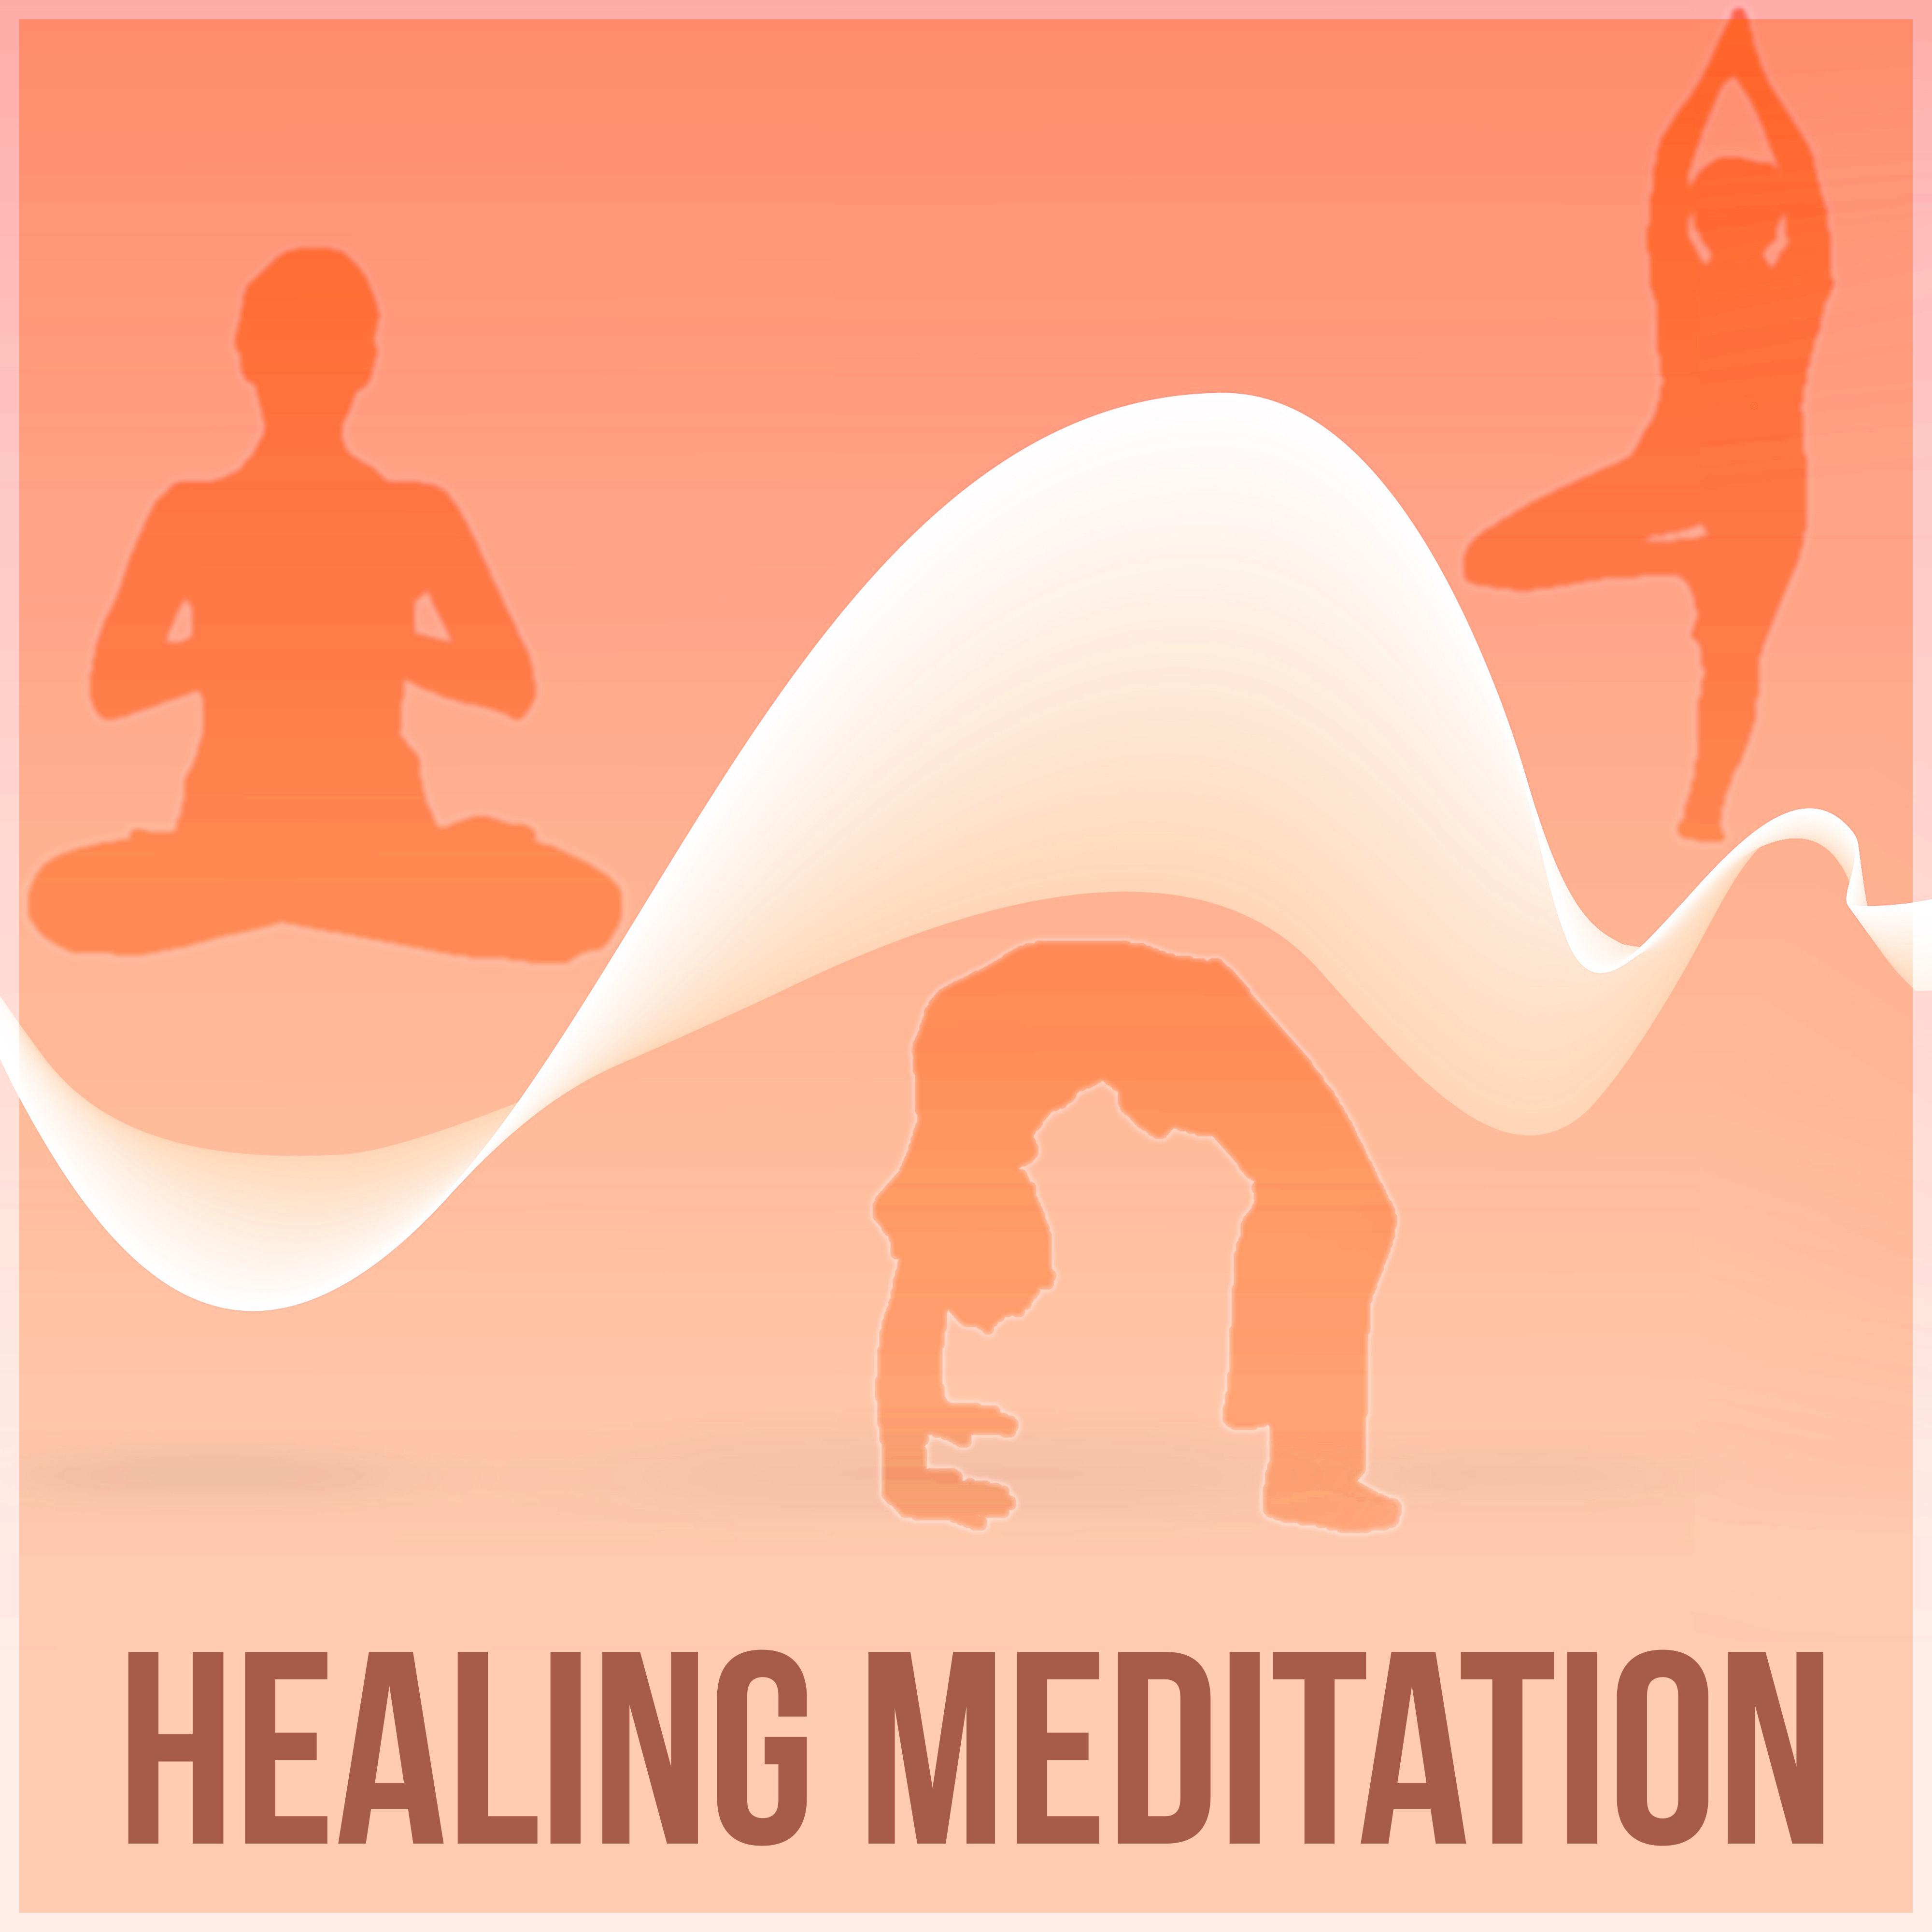 Healing Meditation  Deep Sounds for Meditation, Calm Music for Relaxation, Yoga Poses, Buddhist Meditation, Soul Healing, Mindfulness Meditation